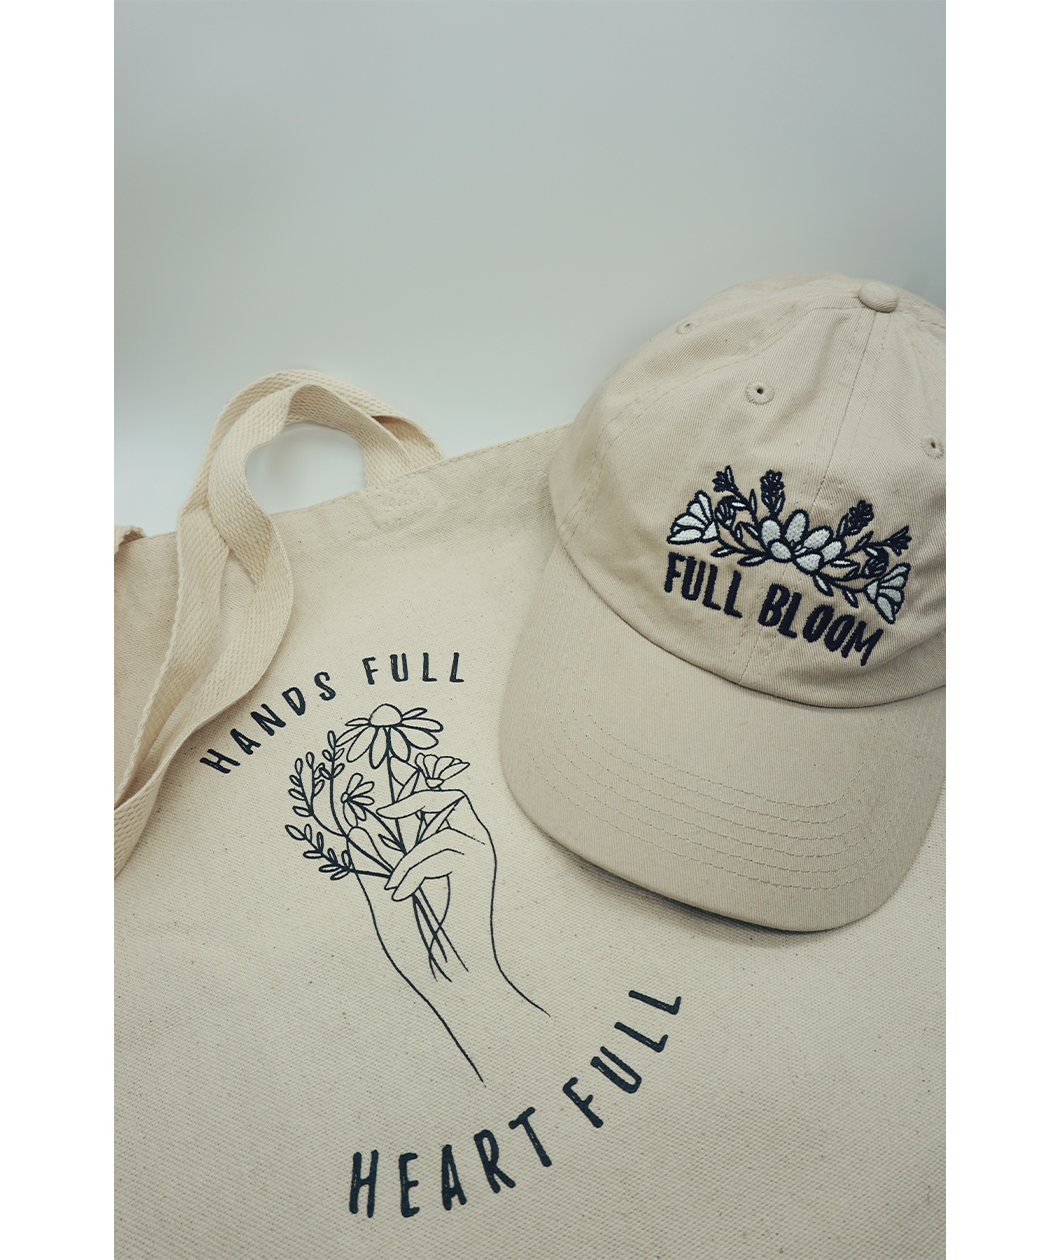 Close up of the canvas tote from Sierra Schultzzie with the words "Hands Full, Heart Full" printed in black as well as an outline of a hand holding flowers. On top of the tote in a beige ball cap with the embroidered words "Full Bloom" and flowers.